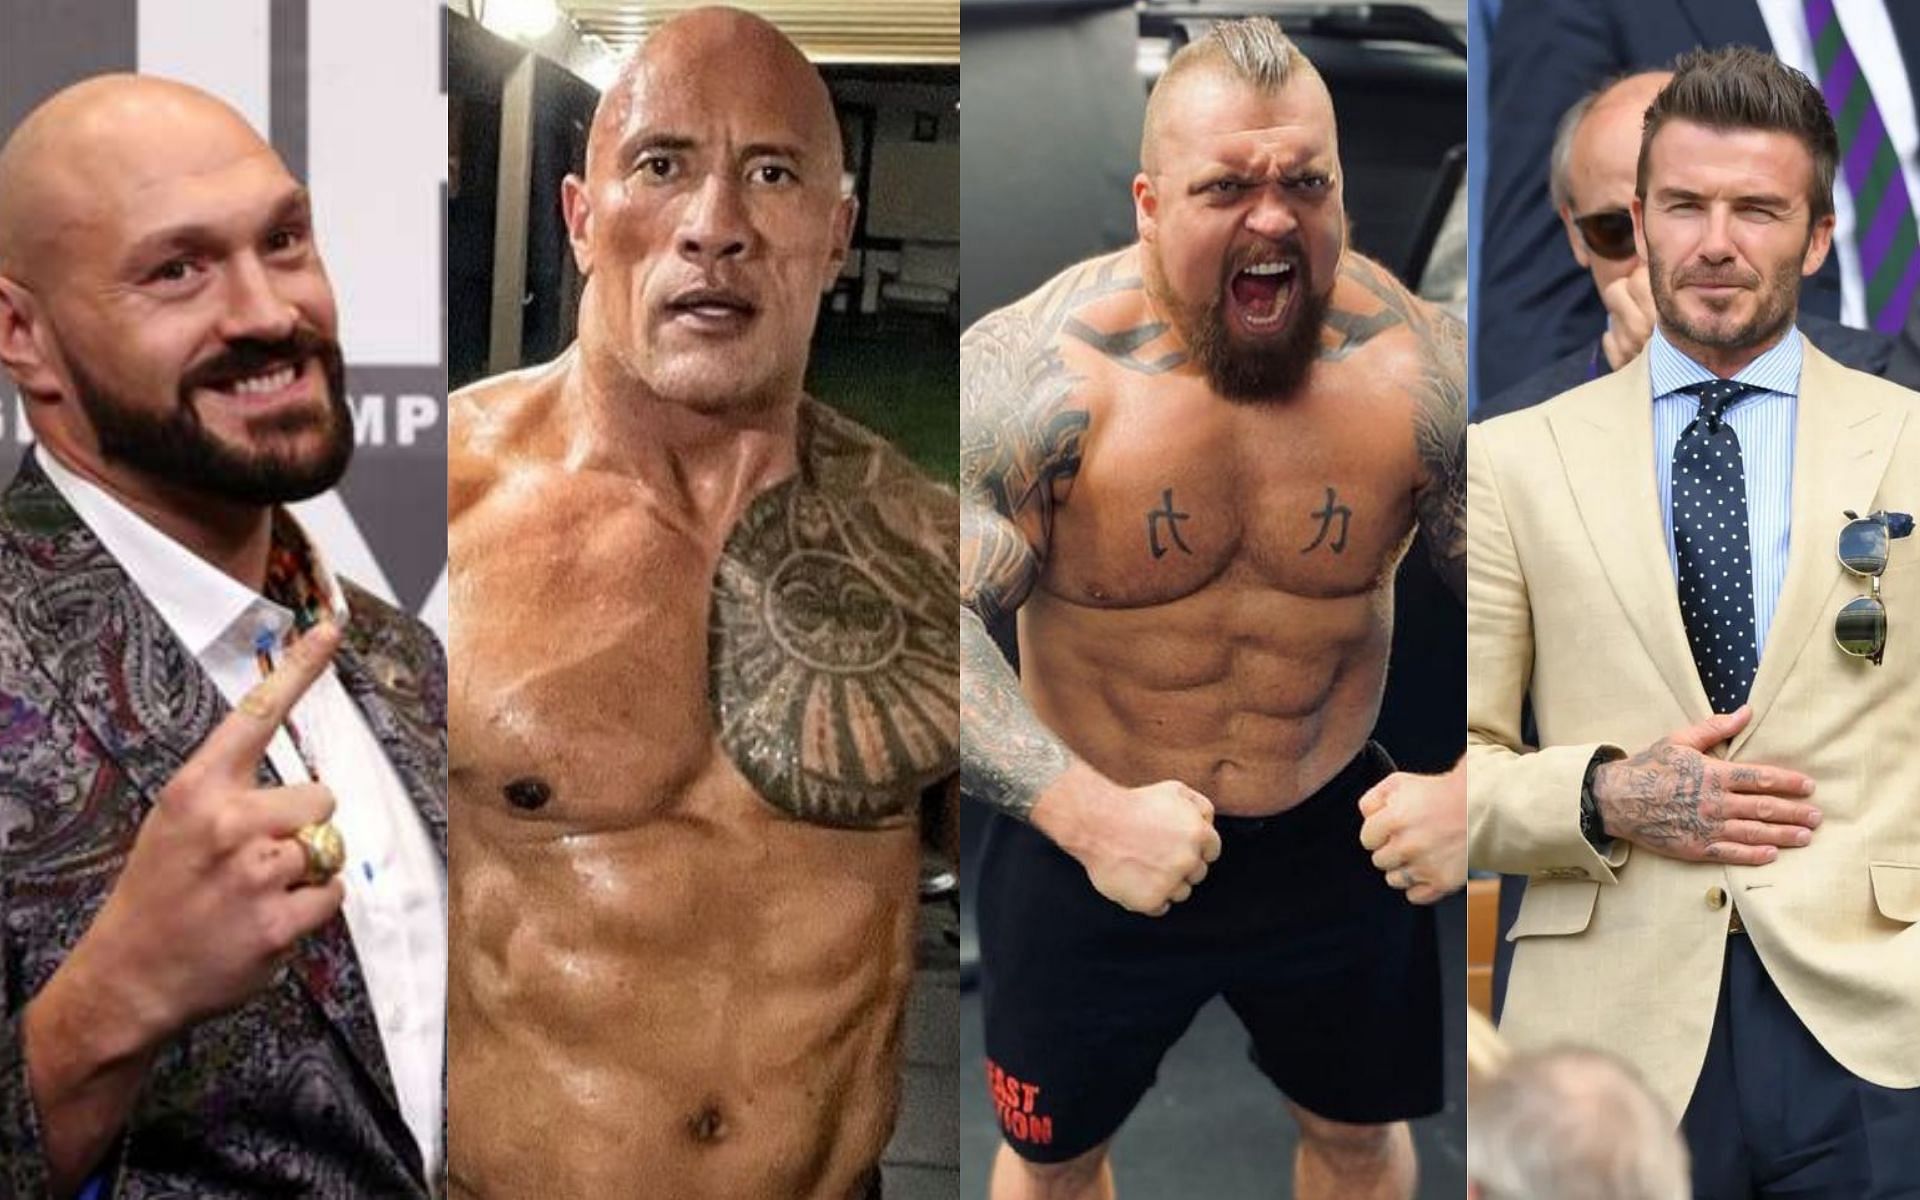 (From left to right) Tyson Fury, The Rock, Eddie Hall, and David Beckham